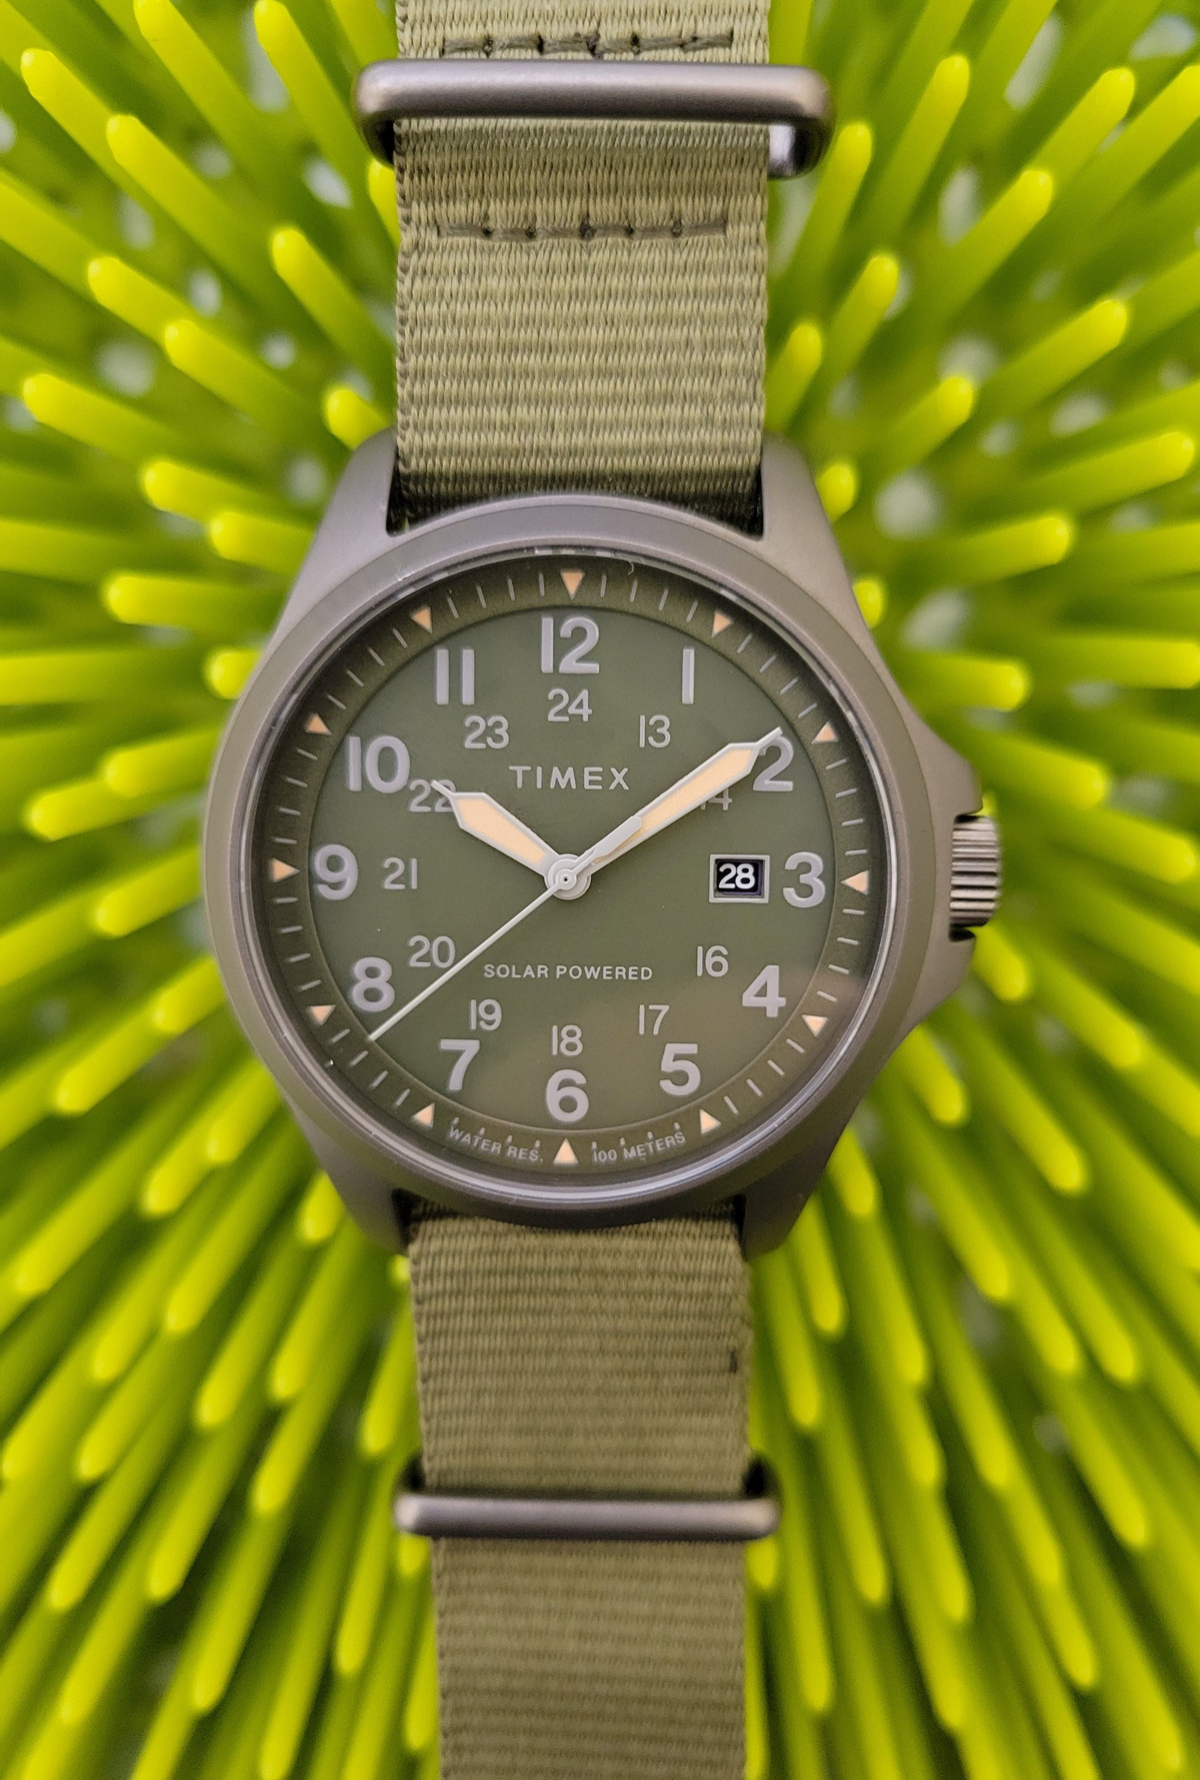 Owner review: Timex Expedition North Field Post Solar 41mm - FIFTH WRIST